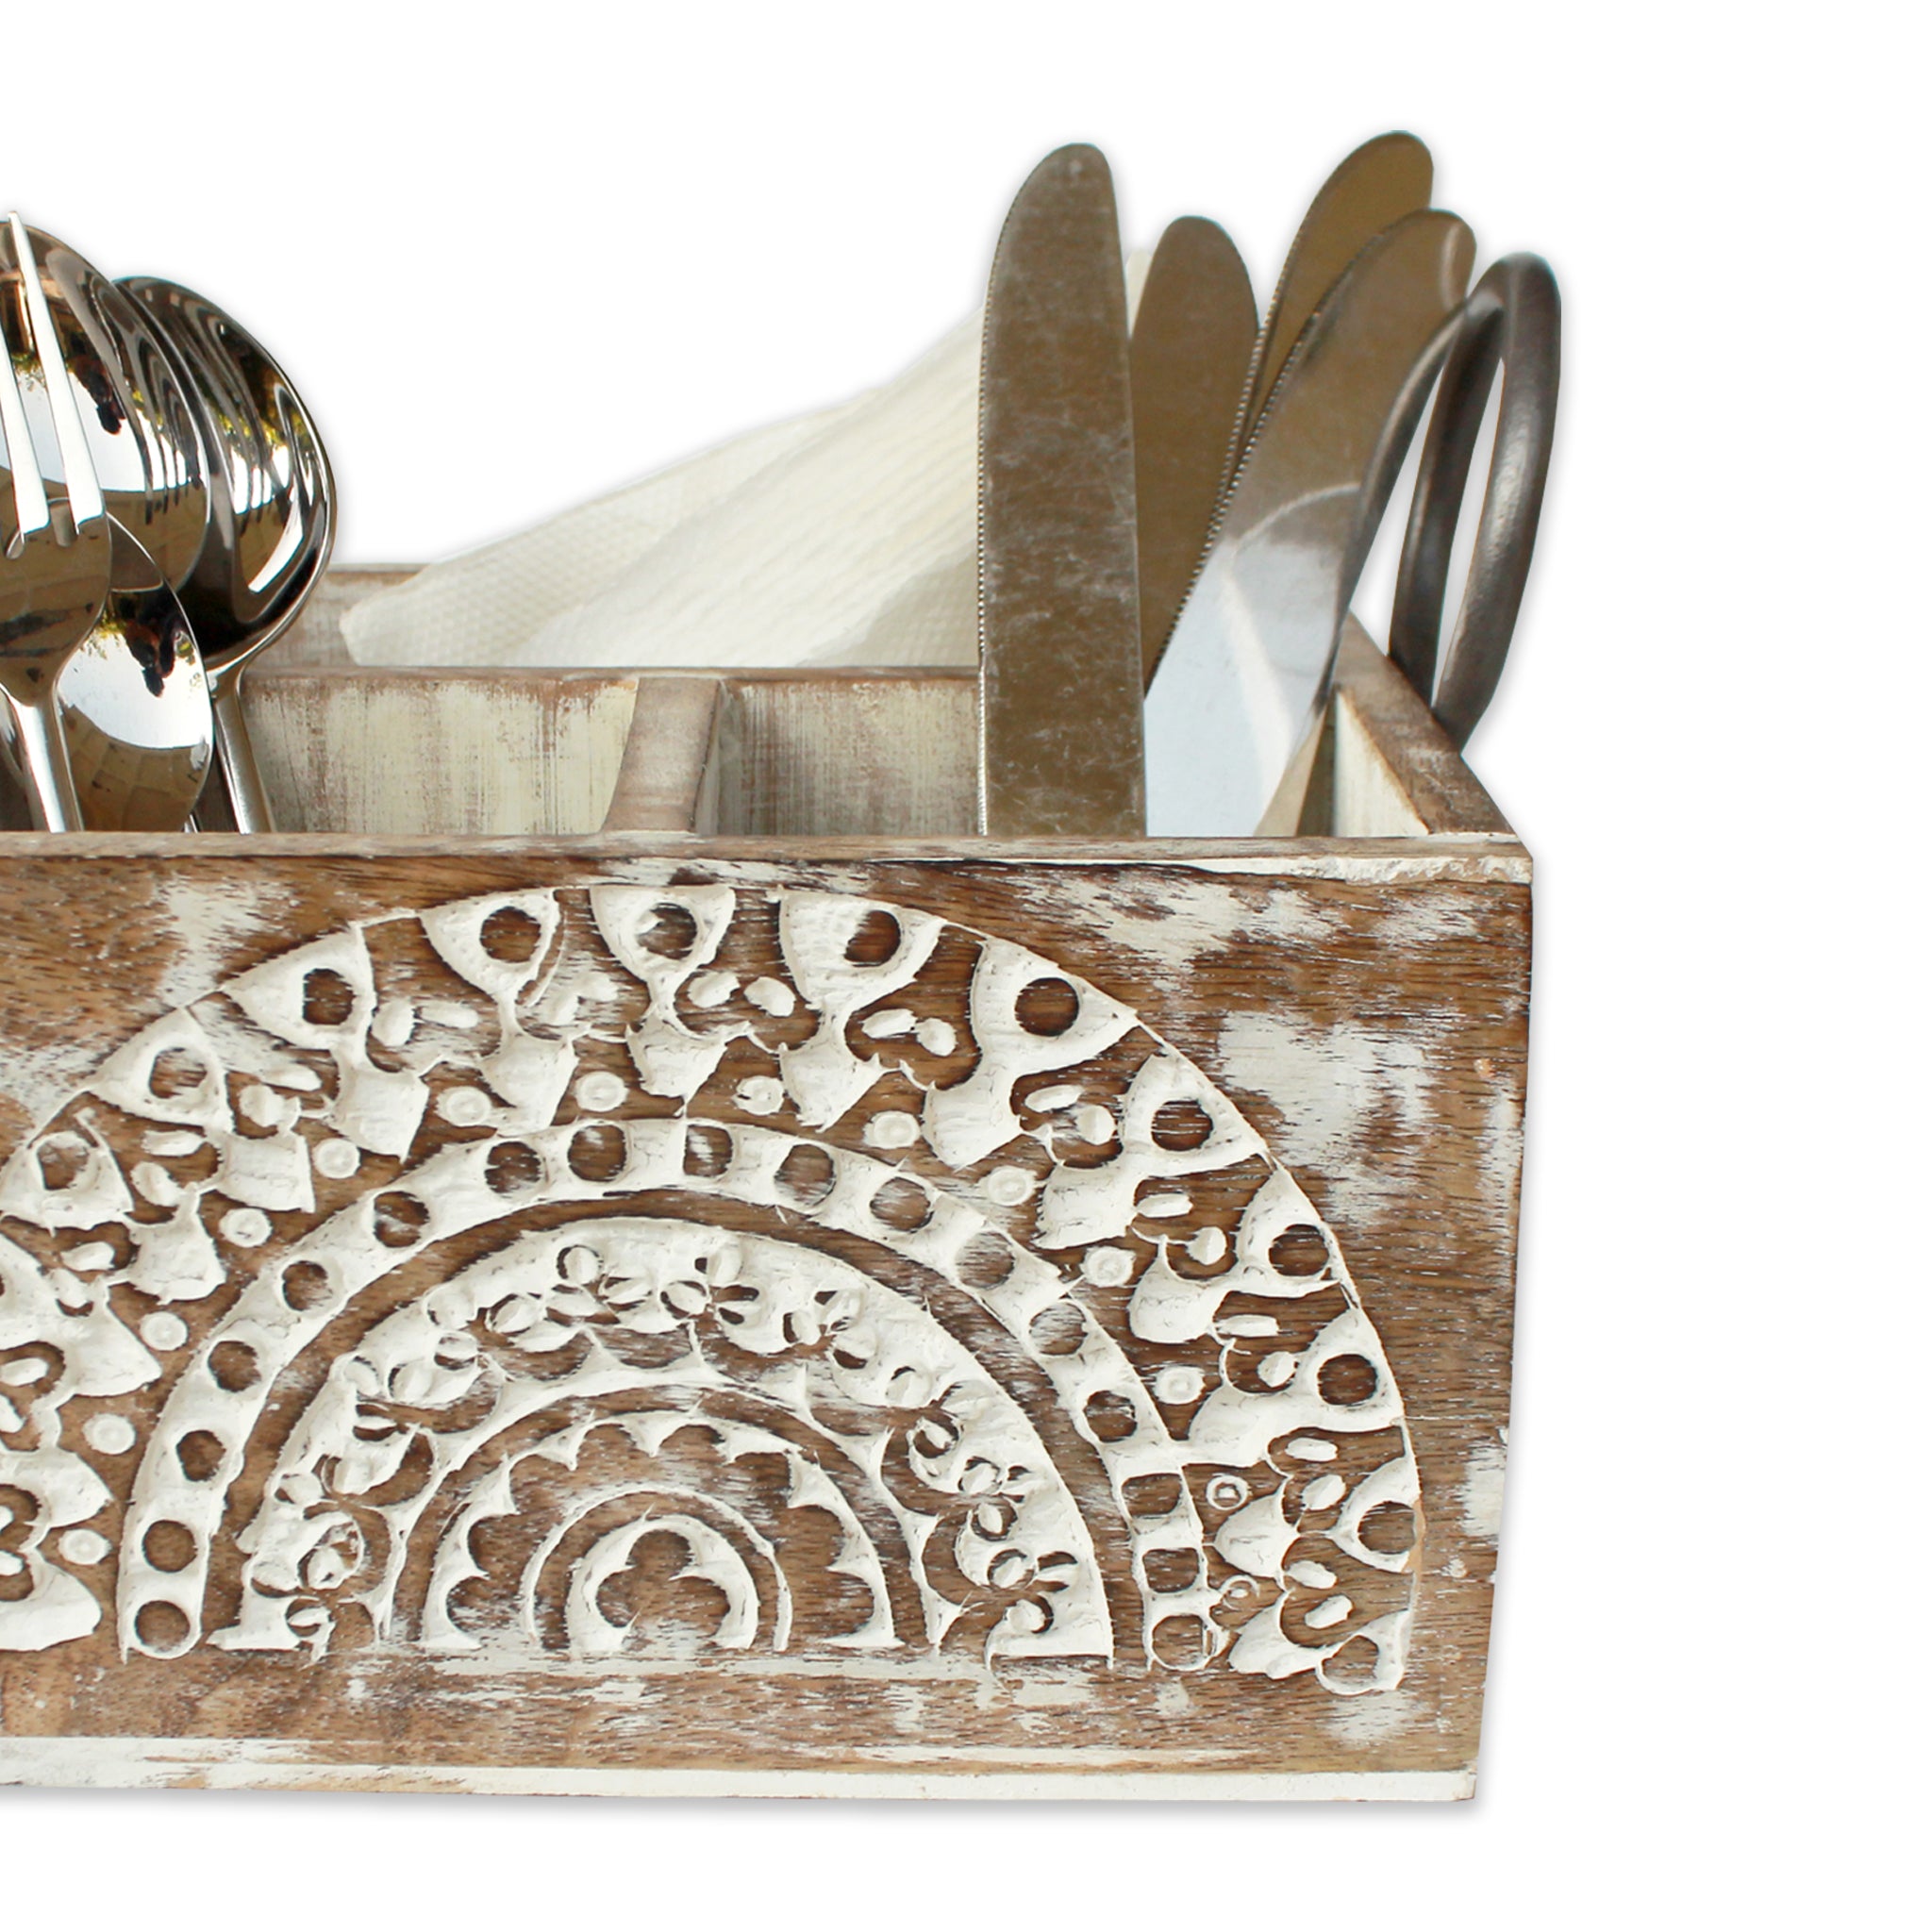 Trunkin' Wooden Sculpted Cutlery Holder / White Wash / 8"*8"*5"